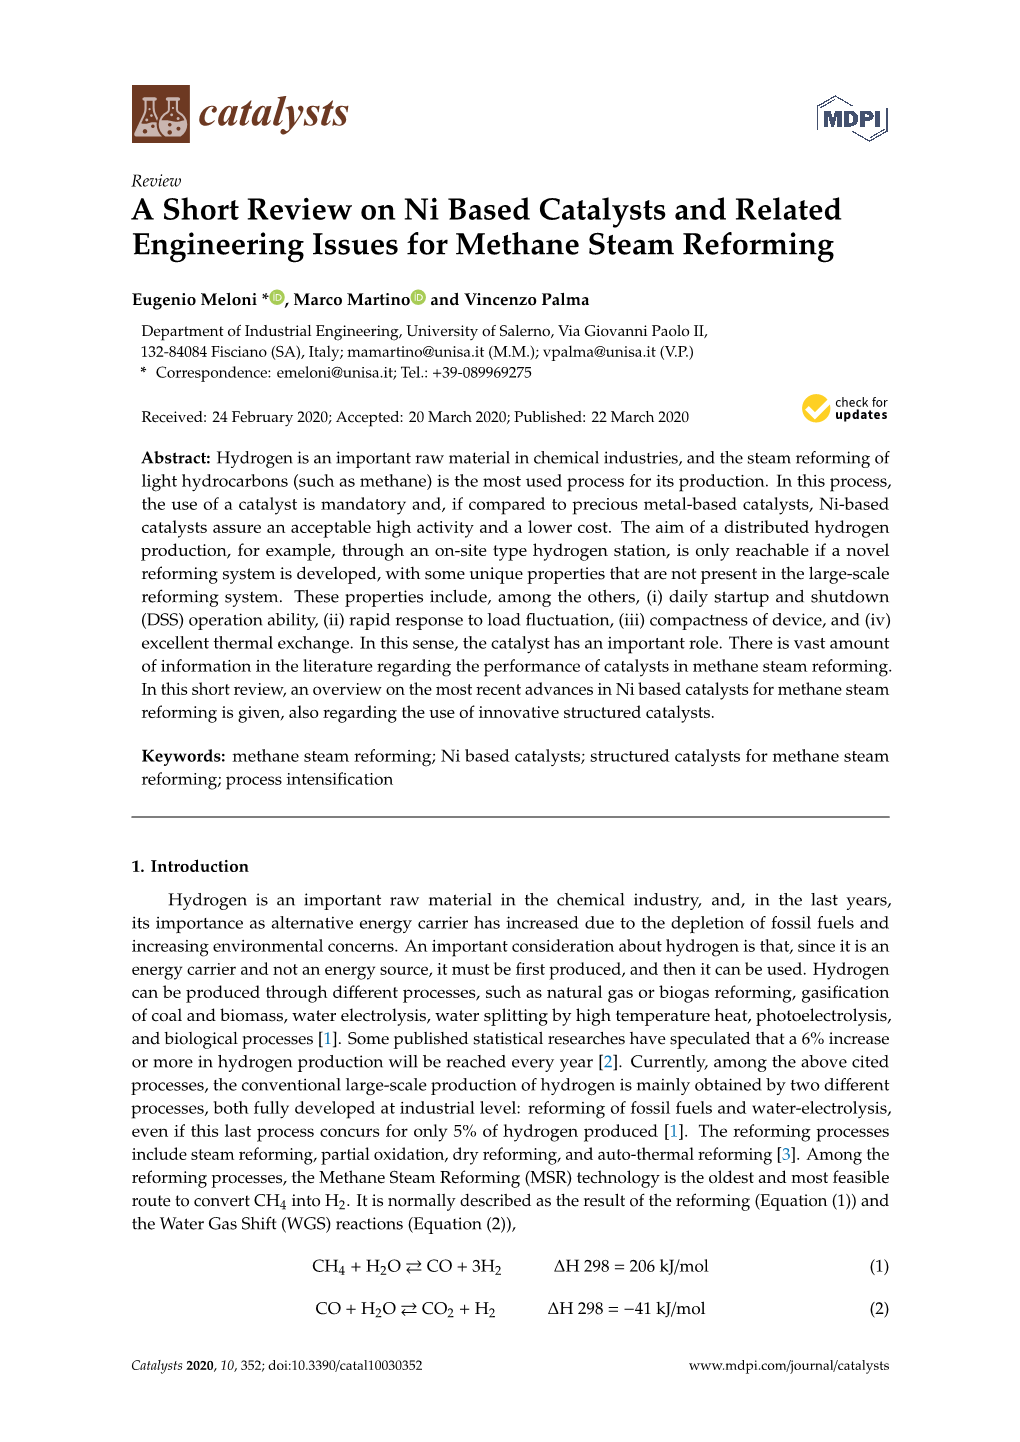 A Short Review on Ni Based Catalysts and Related Engineering Issues for Methane Steam Reforming